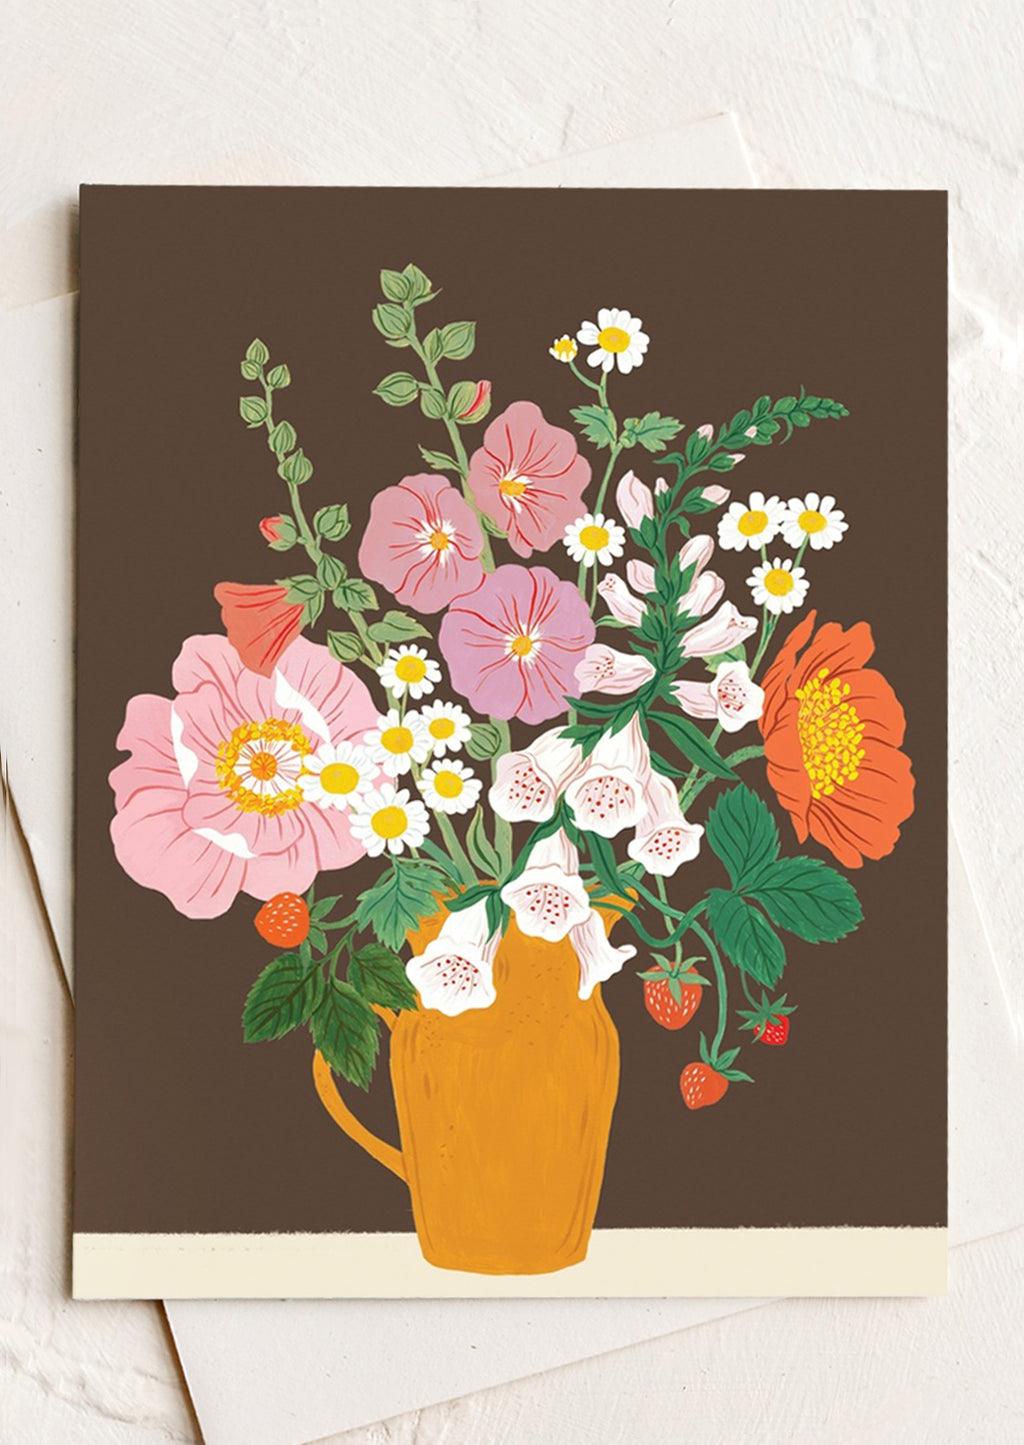 1: A greeting card with floral arrangement on brown background.